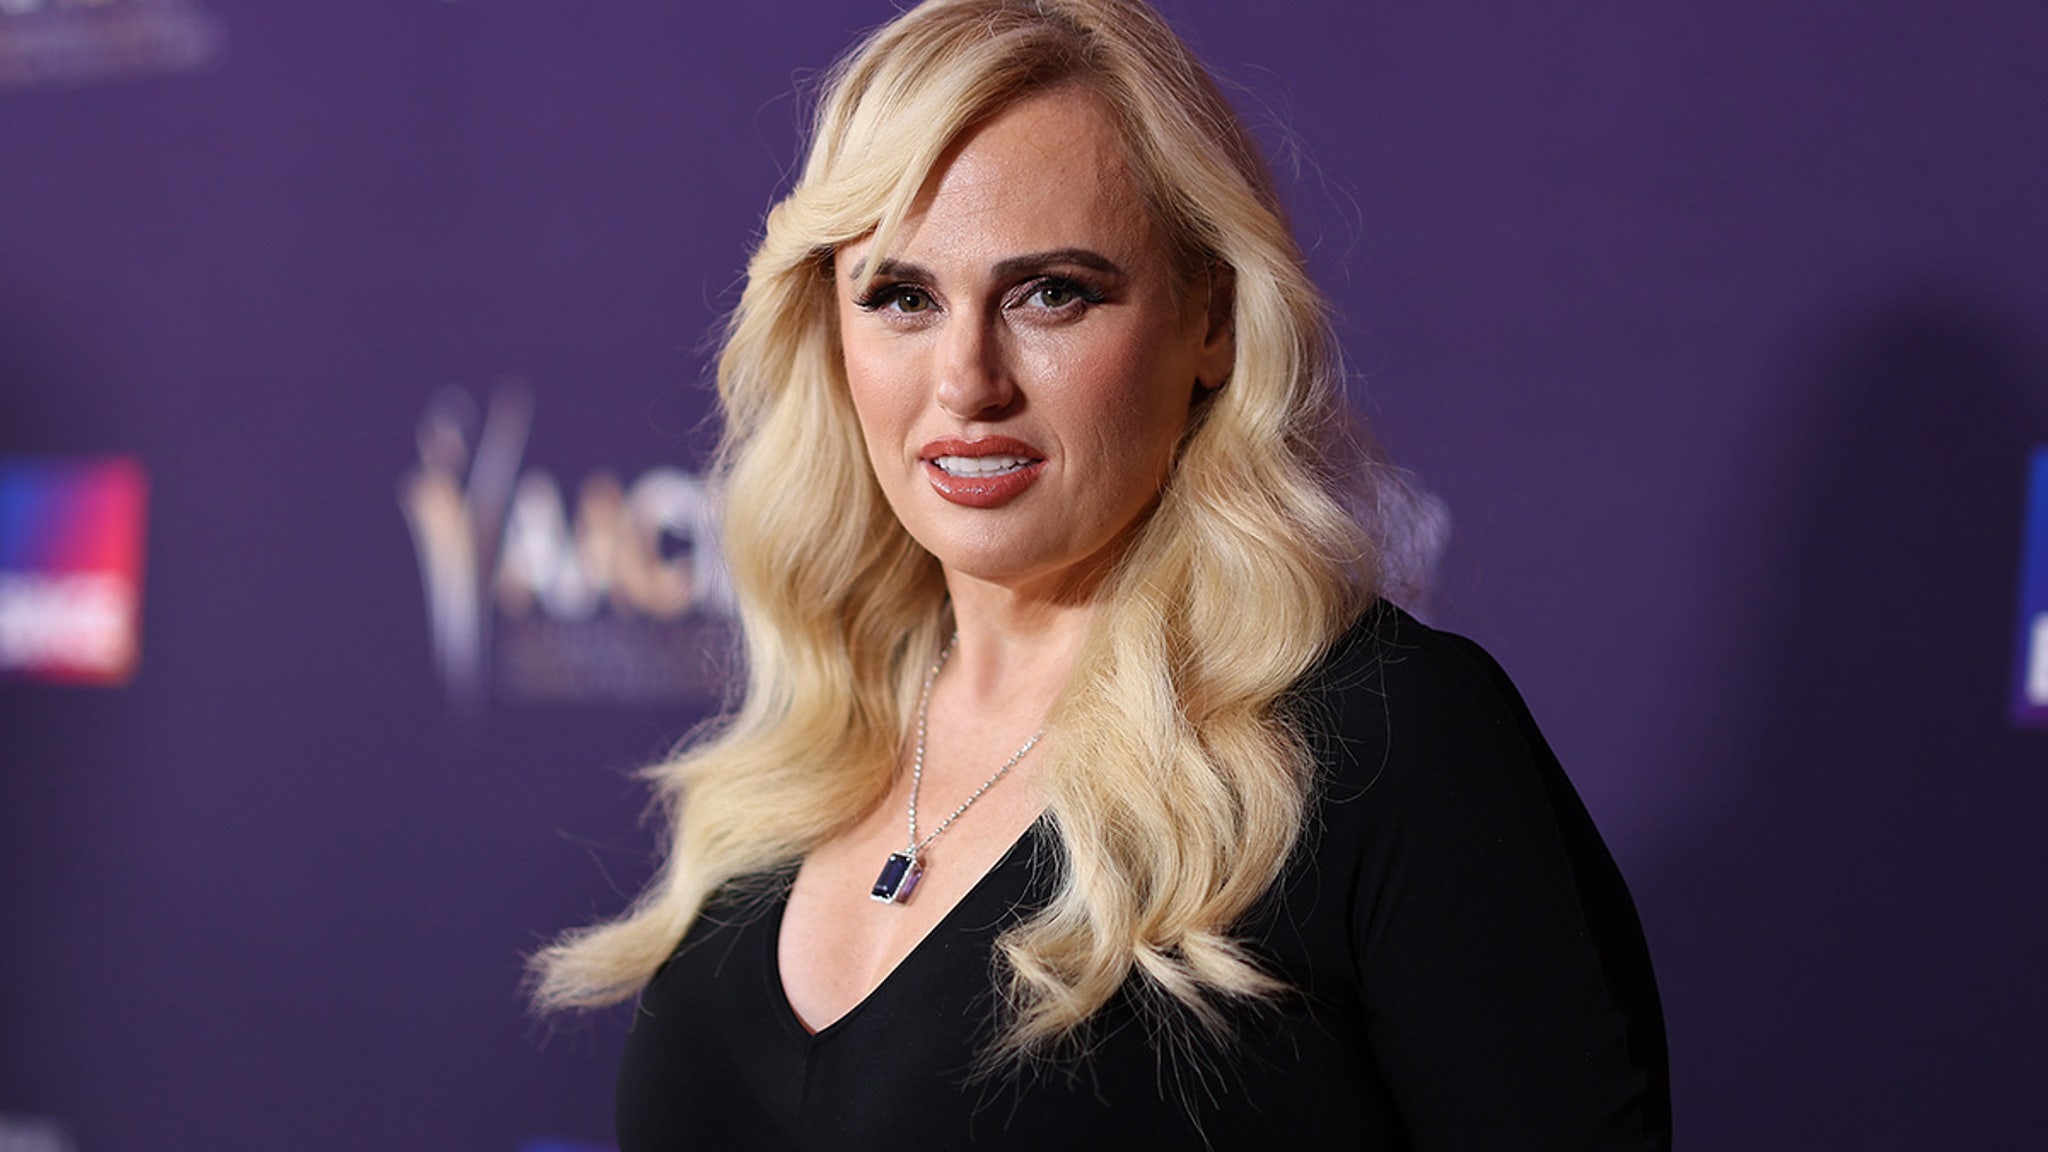 Rebel Wilson Claims Sacha Baron Cohen Is Hollywood 'A--hole' 'Trying to Threaten' Her, Block Memoir